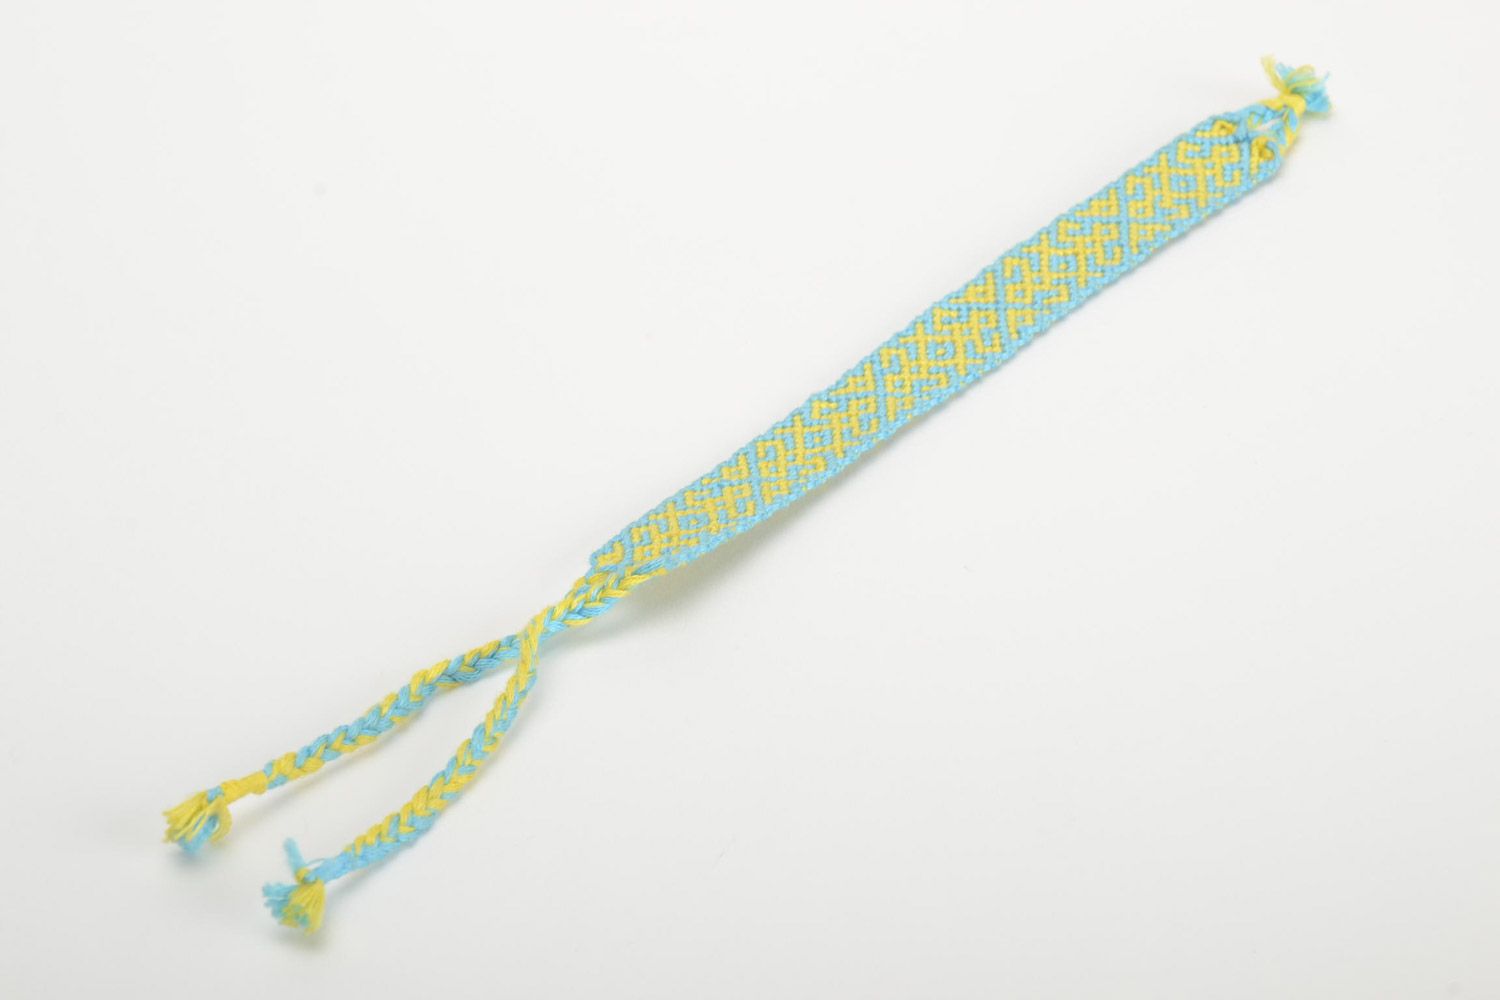 Handmade friendship wrist bracelet woven of blue and yellow threads with ties photo 2